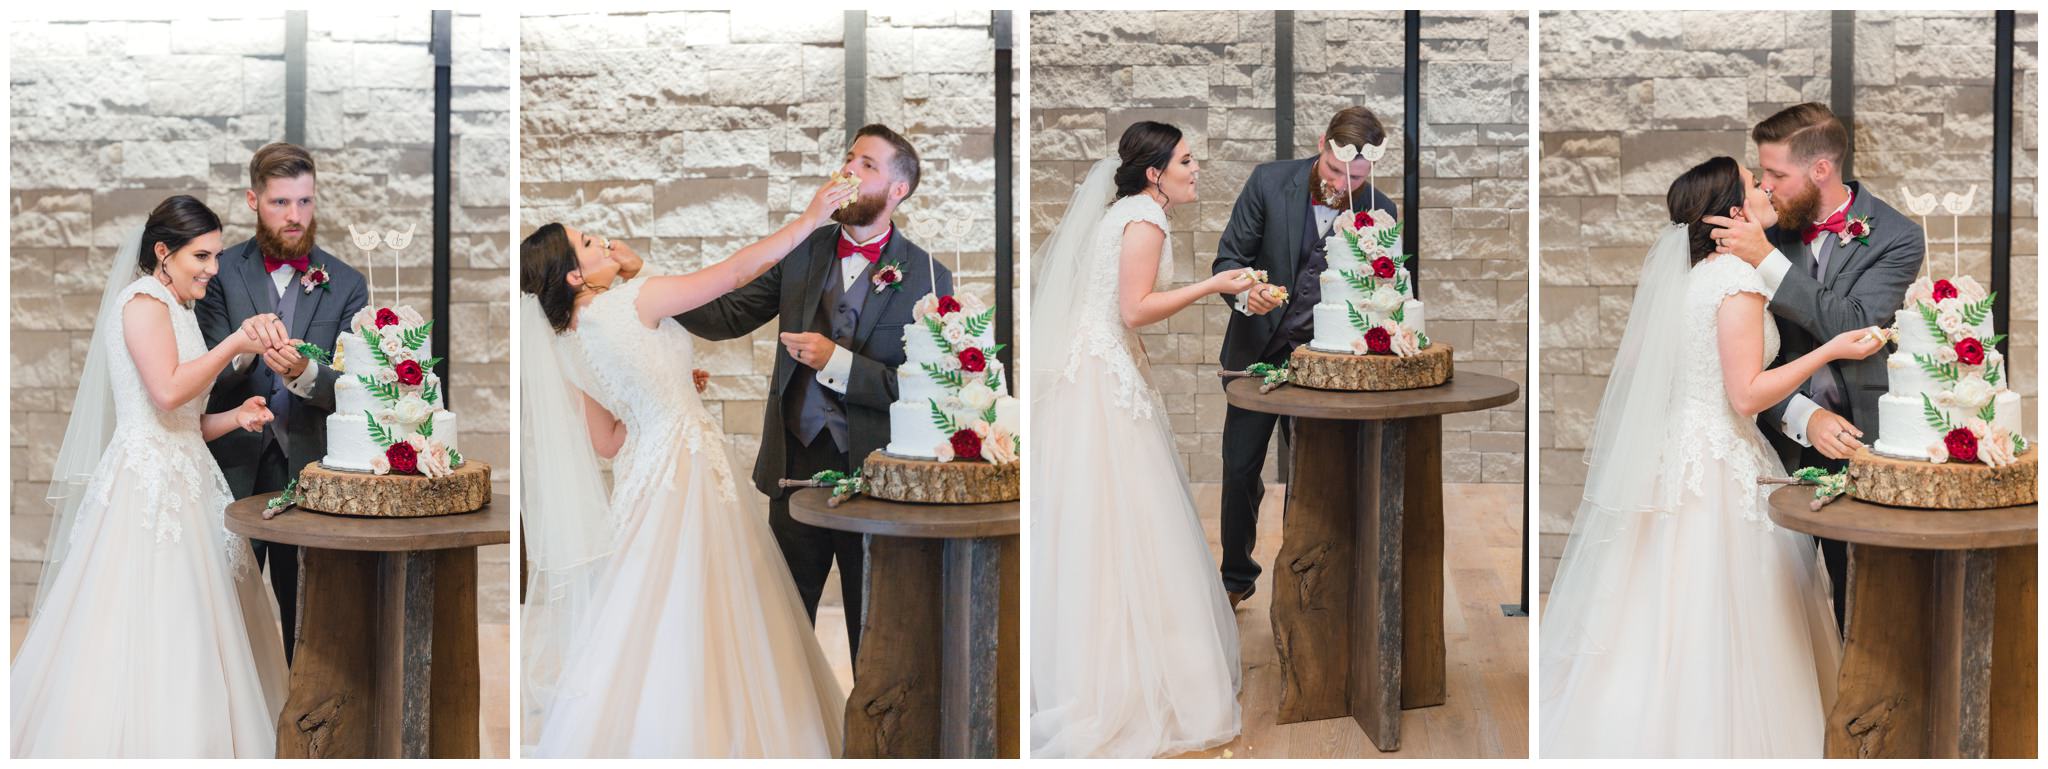 Bride and groom cutting the cake, smashing it into each others faces and then kissing